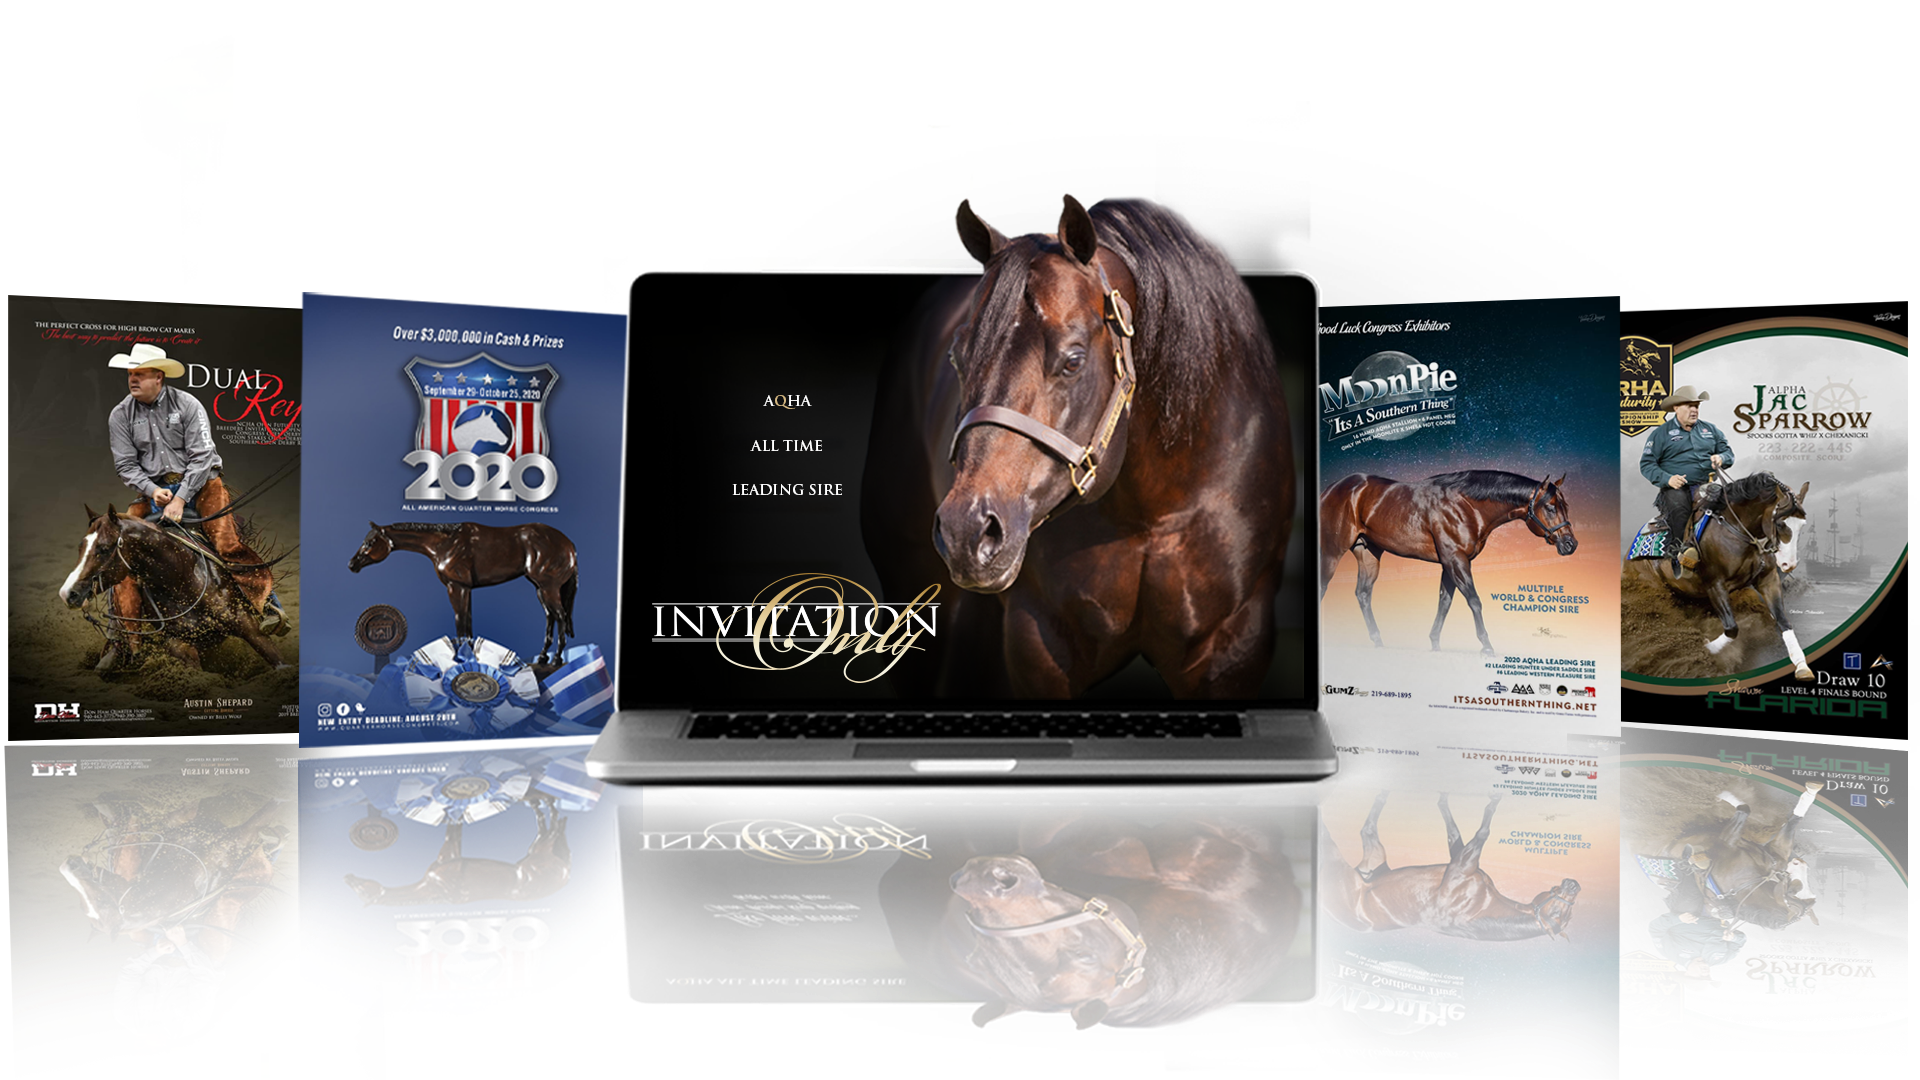 Award Winning Equine Graphic Design specializing in advertising, branding and web design